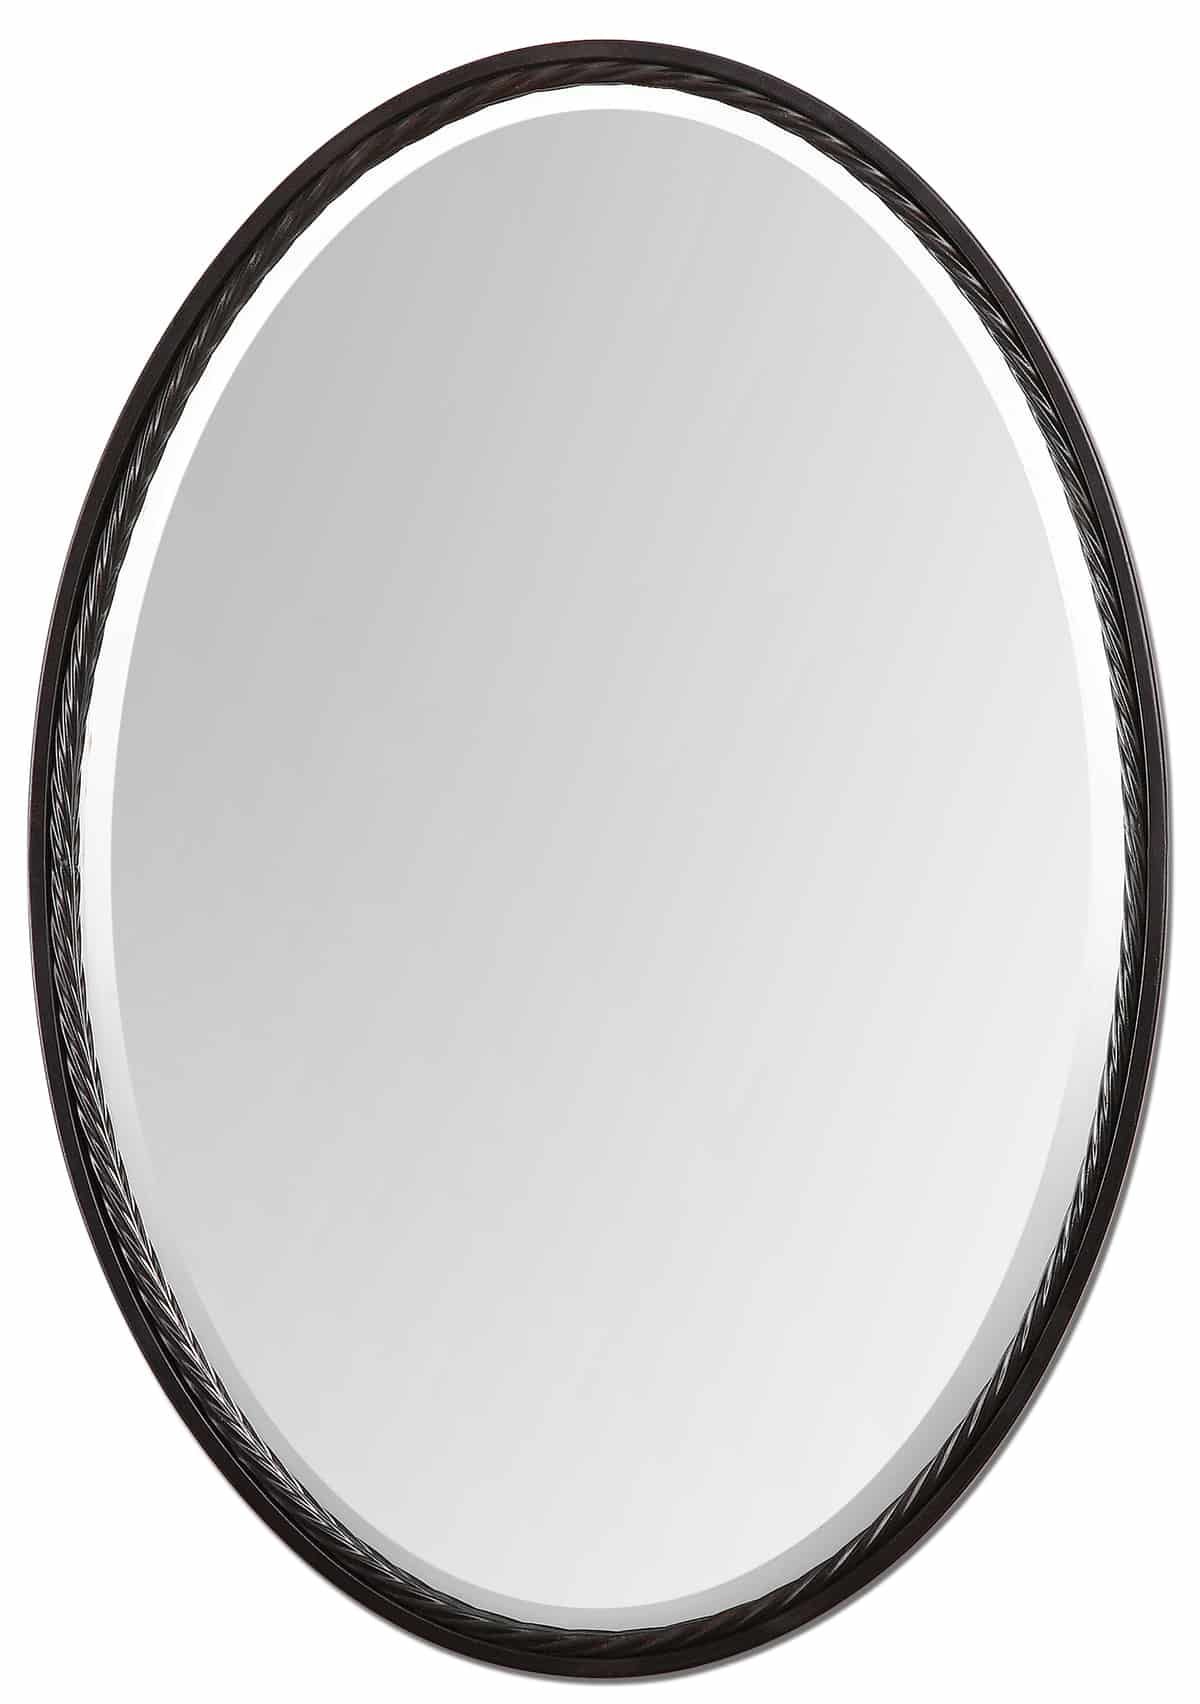 Casalina Oil Rubbed Bronze Oval Mirroruttermost Throughout Ceiling Hung Oiled Bronze Oval Mirrors (View 5 of 15)